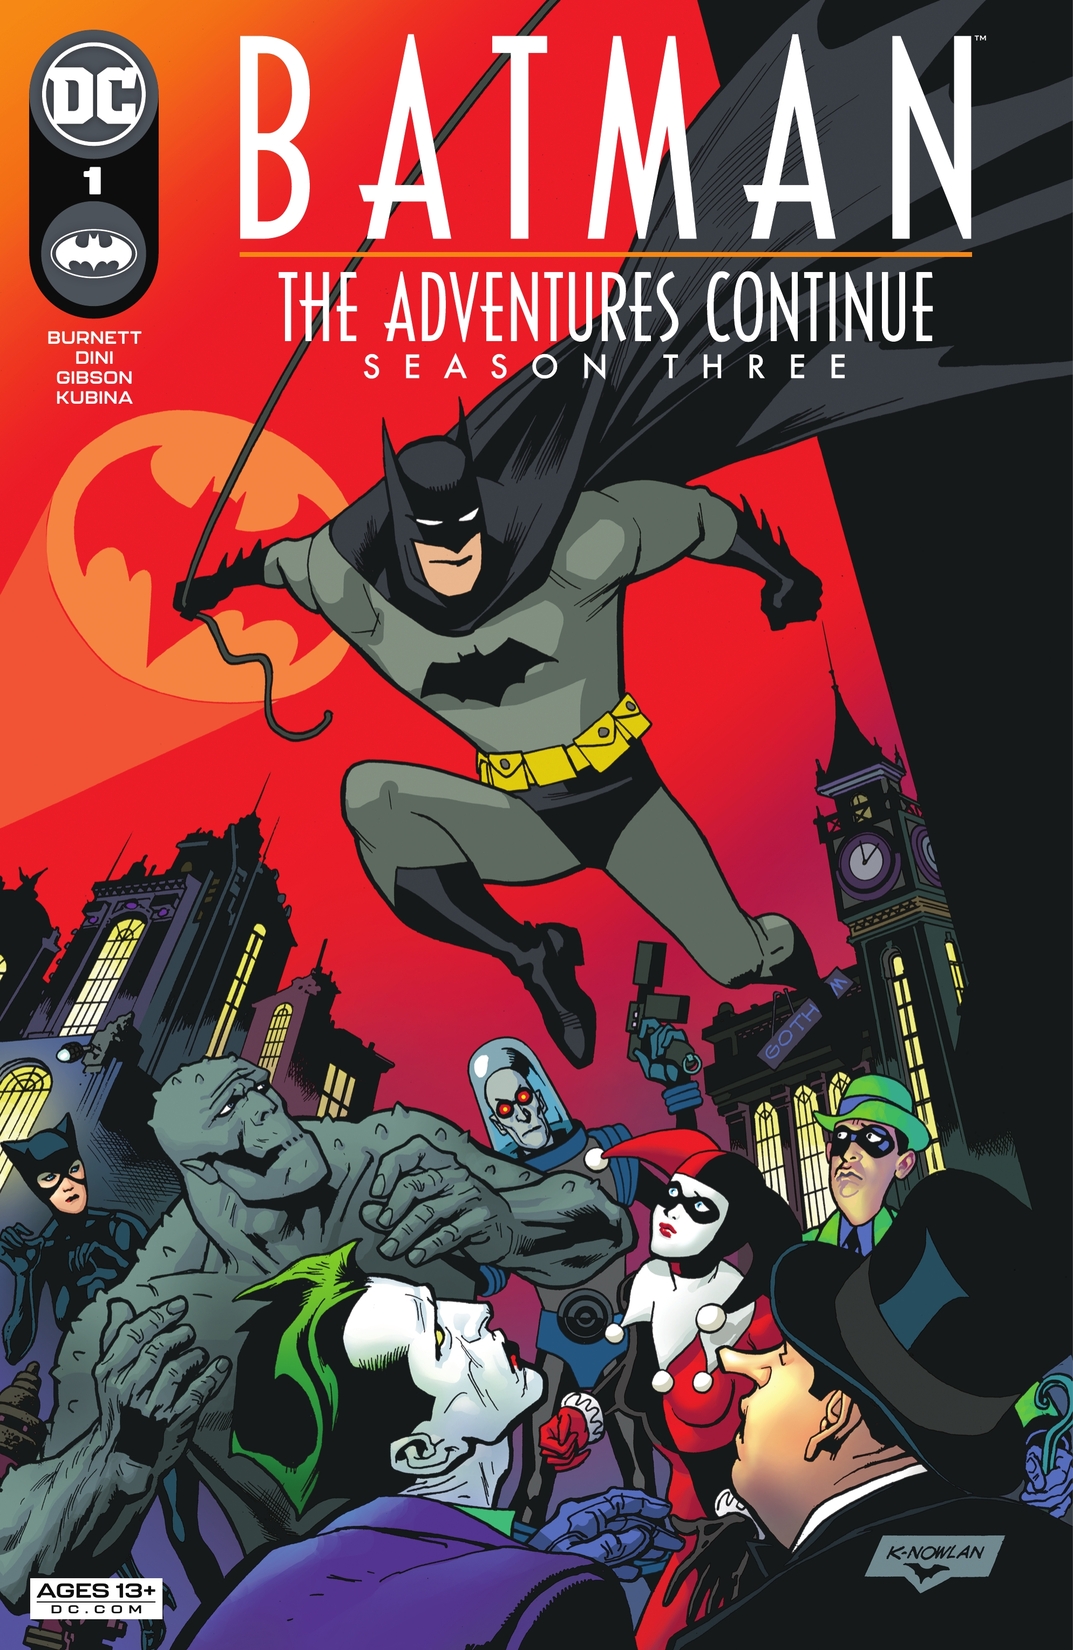 Batman: The Adventures Continue Season Three #1 preview images